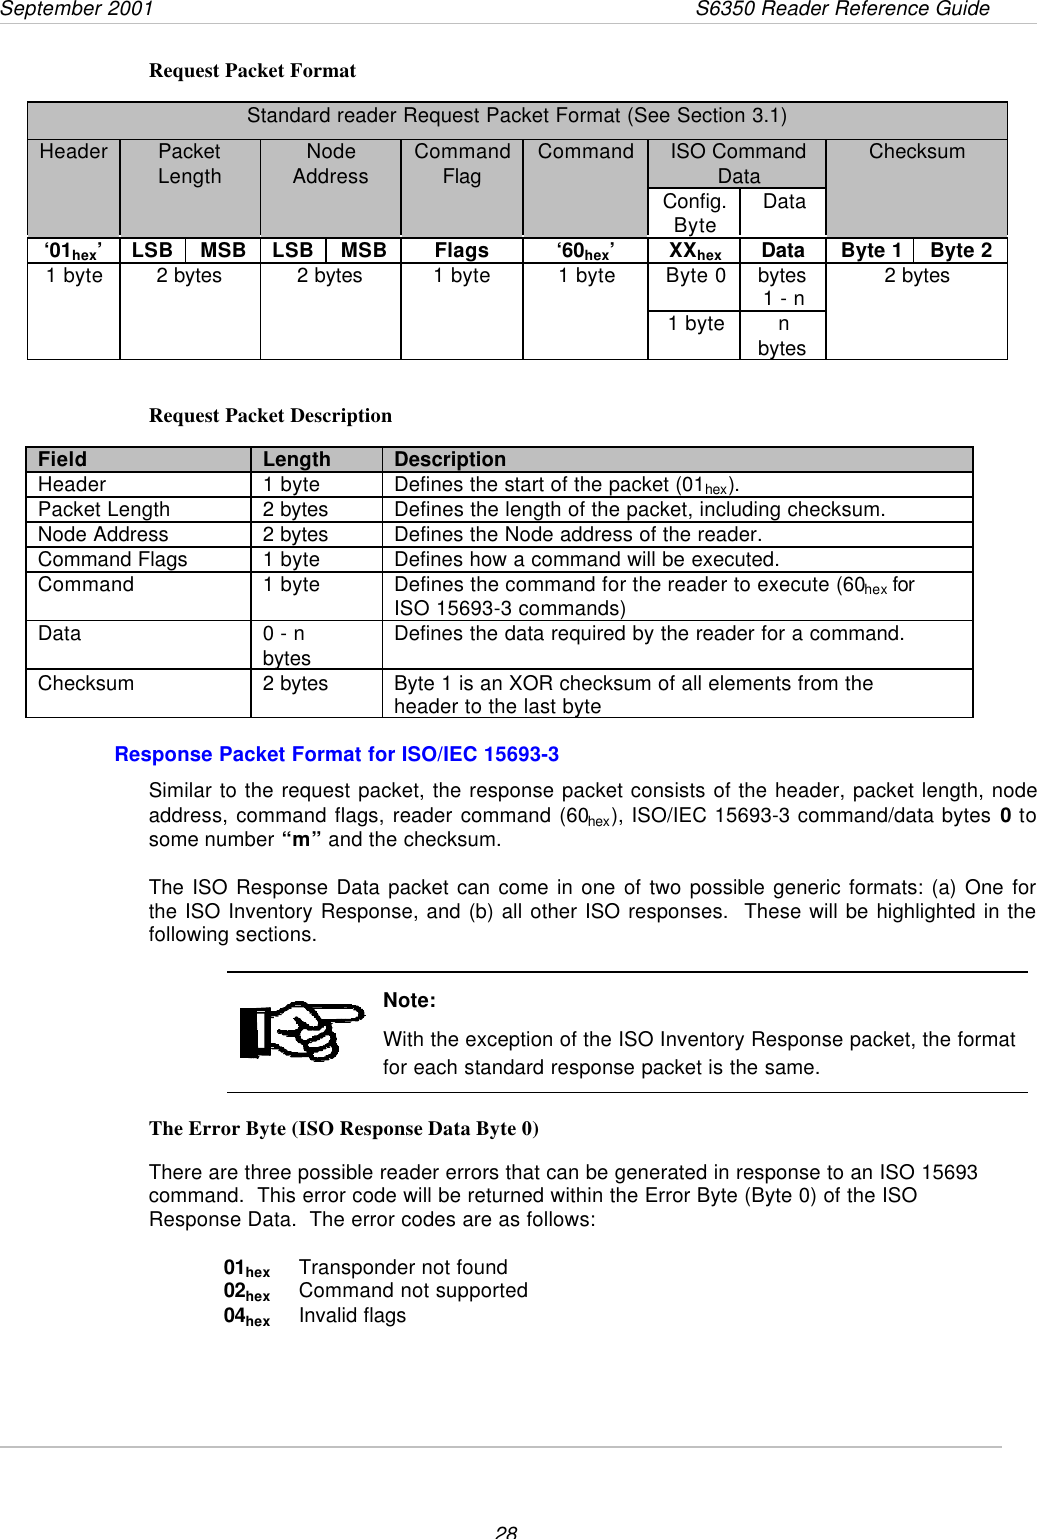 September 2001                 S6350 Reader Reference Guide28Request Packet FormatStandard reader Request Packet Format (See Section 3.1)ISO CommandDataHeader PacketLength NodeAddress CommandFlag CommandConfig.Byte DataChecksum‘01hex’LSB MSB LSB MSB Flags ‘60hex’XXhex Data Byte 1 Byte 2Byte 0 bytes1 - n1 byte 2 bytes 2 bytes 1 byte 1 byte1 byte nbytes2 bytesRequest Packet DescriptionField Length DescriptionHeader 1 byte Defines the start of the packet (01hex).Packet Length 2 bytes Defines the length of the packet, including checksum.Node Address 2 bytes Defines the Node address of the reader.Command Flags 1 byte Defines how a command will be executed.Command 1 byte Defines the command for the reader to execute (60hex forISO 15693-3 commands)Data 0 - nbytes Defines the data required by the reader for a command.Checksum 2 bytes Byte 1 is an XOR checksum of all elements from theheader to the last byteResponse Packet Format for ISO/IEC 15693-3Similar to the request packet, the response packet consists of the header, packet length, nodeaddress, command flags, reader command (60hex), ISO/IEC 15693-3 command/data bytes 0 tosome number “m” and the checksum.The ISO Response Data packet can come in one of two possible generic formats: (a) One forthe ISO Inventory Response, and (b) all other ISO responses.  These will be highlighted in thefollowing sections.Note:With the exception of the ISO Inventory Response packet, the formatfor each standard response packet is the same.The Error Byte (ISO Response Data Byte 0)There are three possible reader errors that can be generated in response to an ISO 15693command.  This error code will be returned within the Error Byte (Byte 0) of the ISOResponse Data.  The error codes are as follows:01hex Transponder not found02hex Command not supported04hex Invalid flags